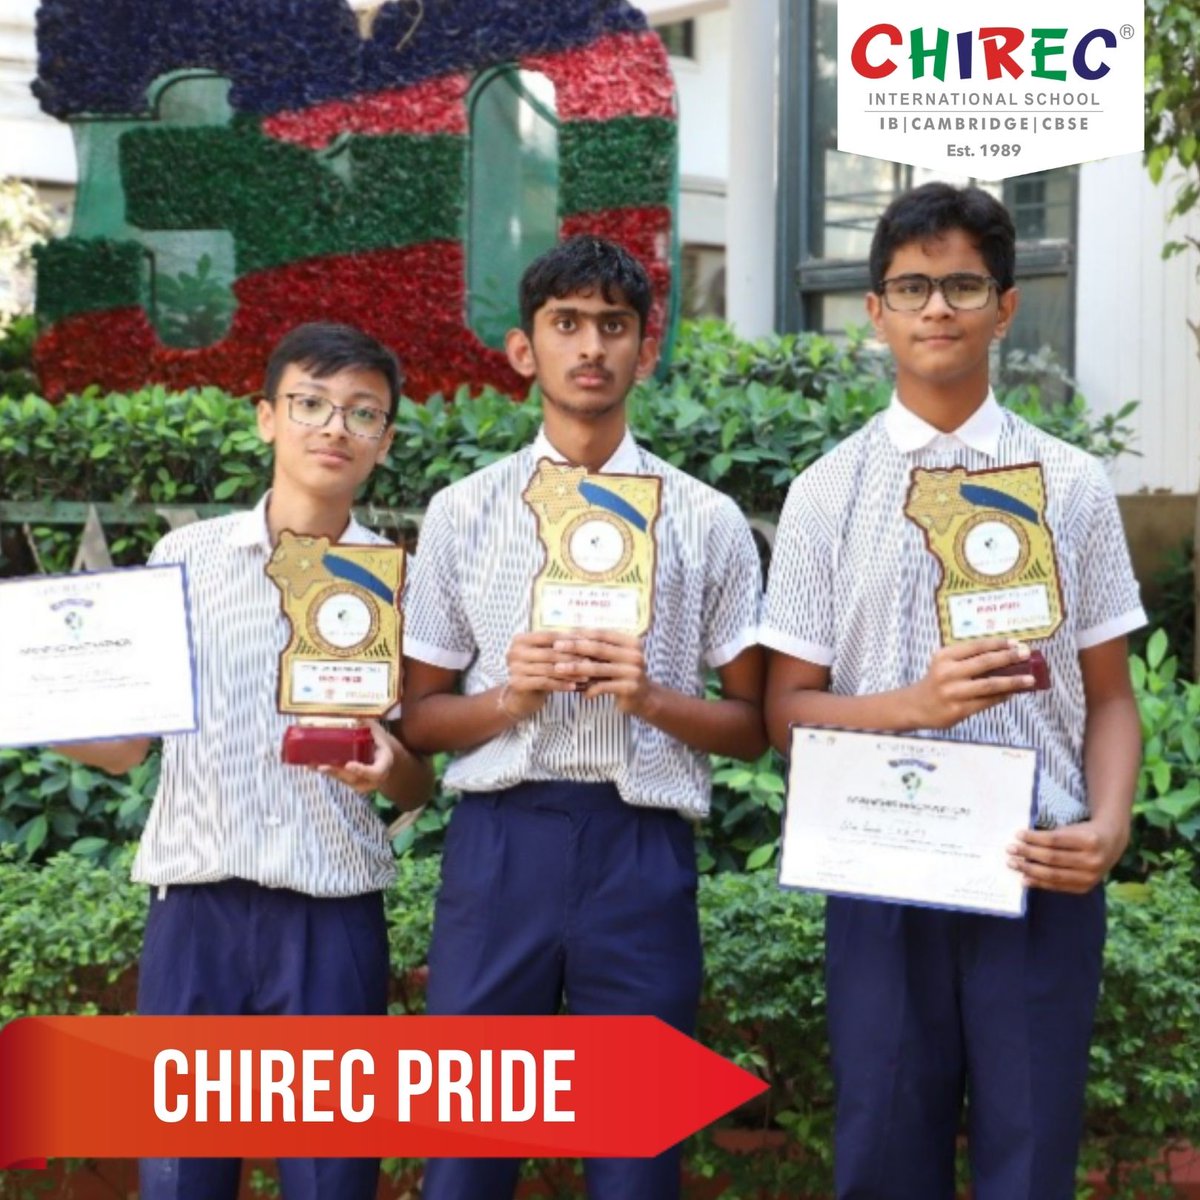 We’re proud of Mehaan, Sahas, and Anirudh of Grade 8 for winning the Makers Hackathon in 10-13 years category organized by Pravaha foundation & IIIT Hyderabad! Their innovative PUD (Pipe Unclogging Device) wowed the judges & earned them a cash prize worth ₹ 30,000. #CHIRECPride